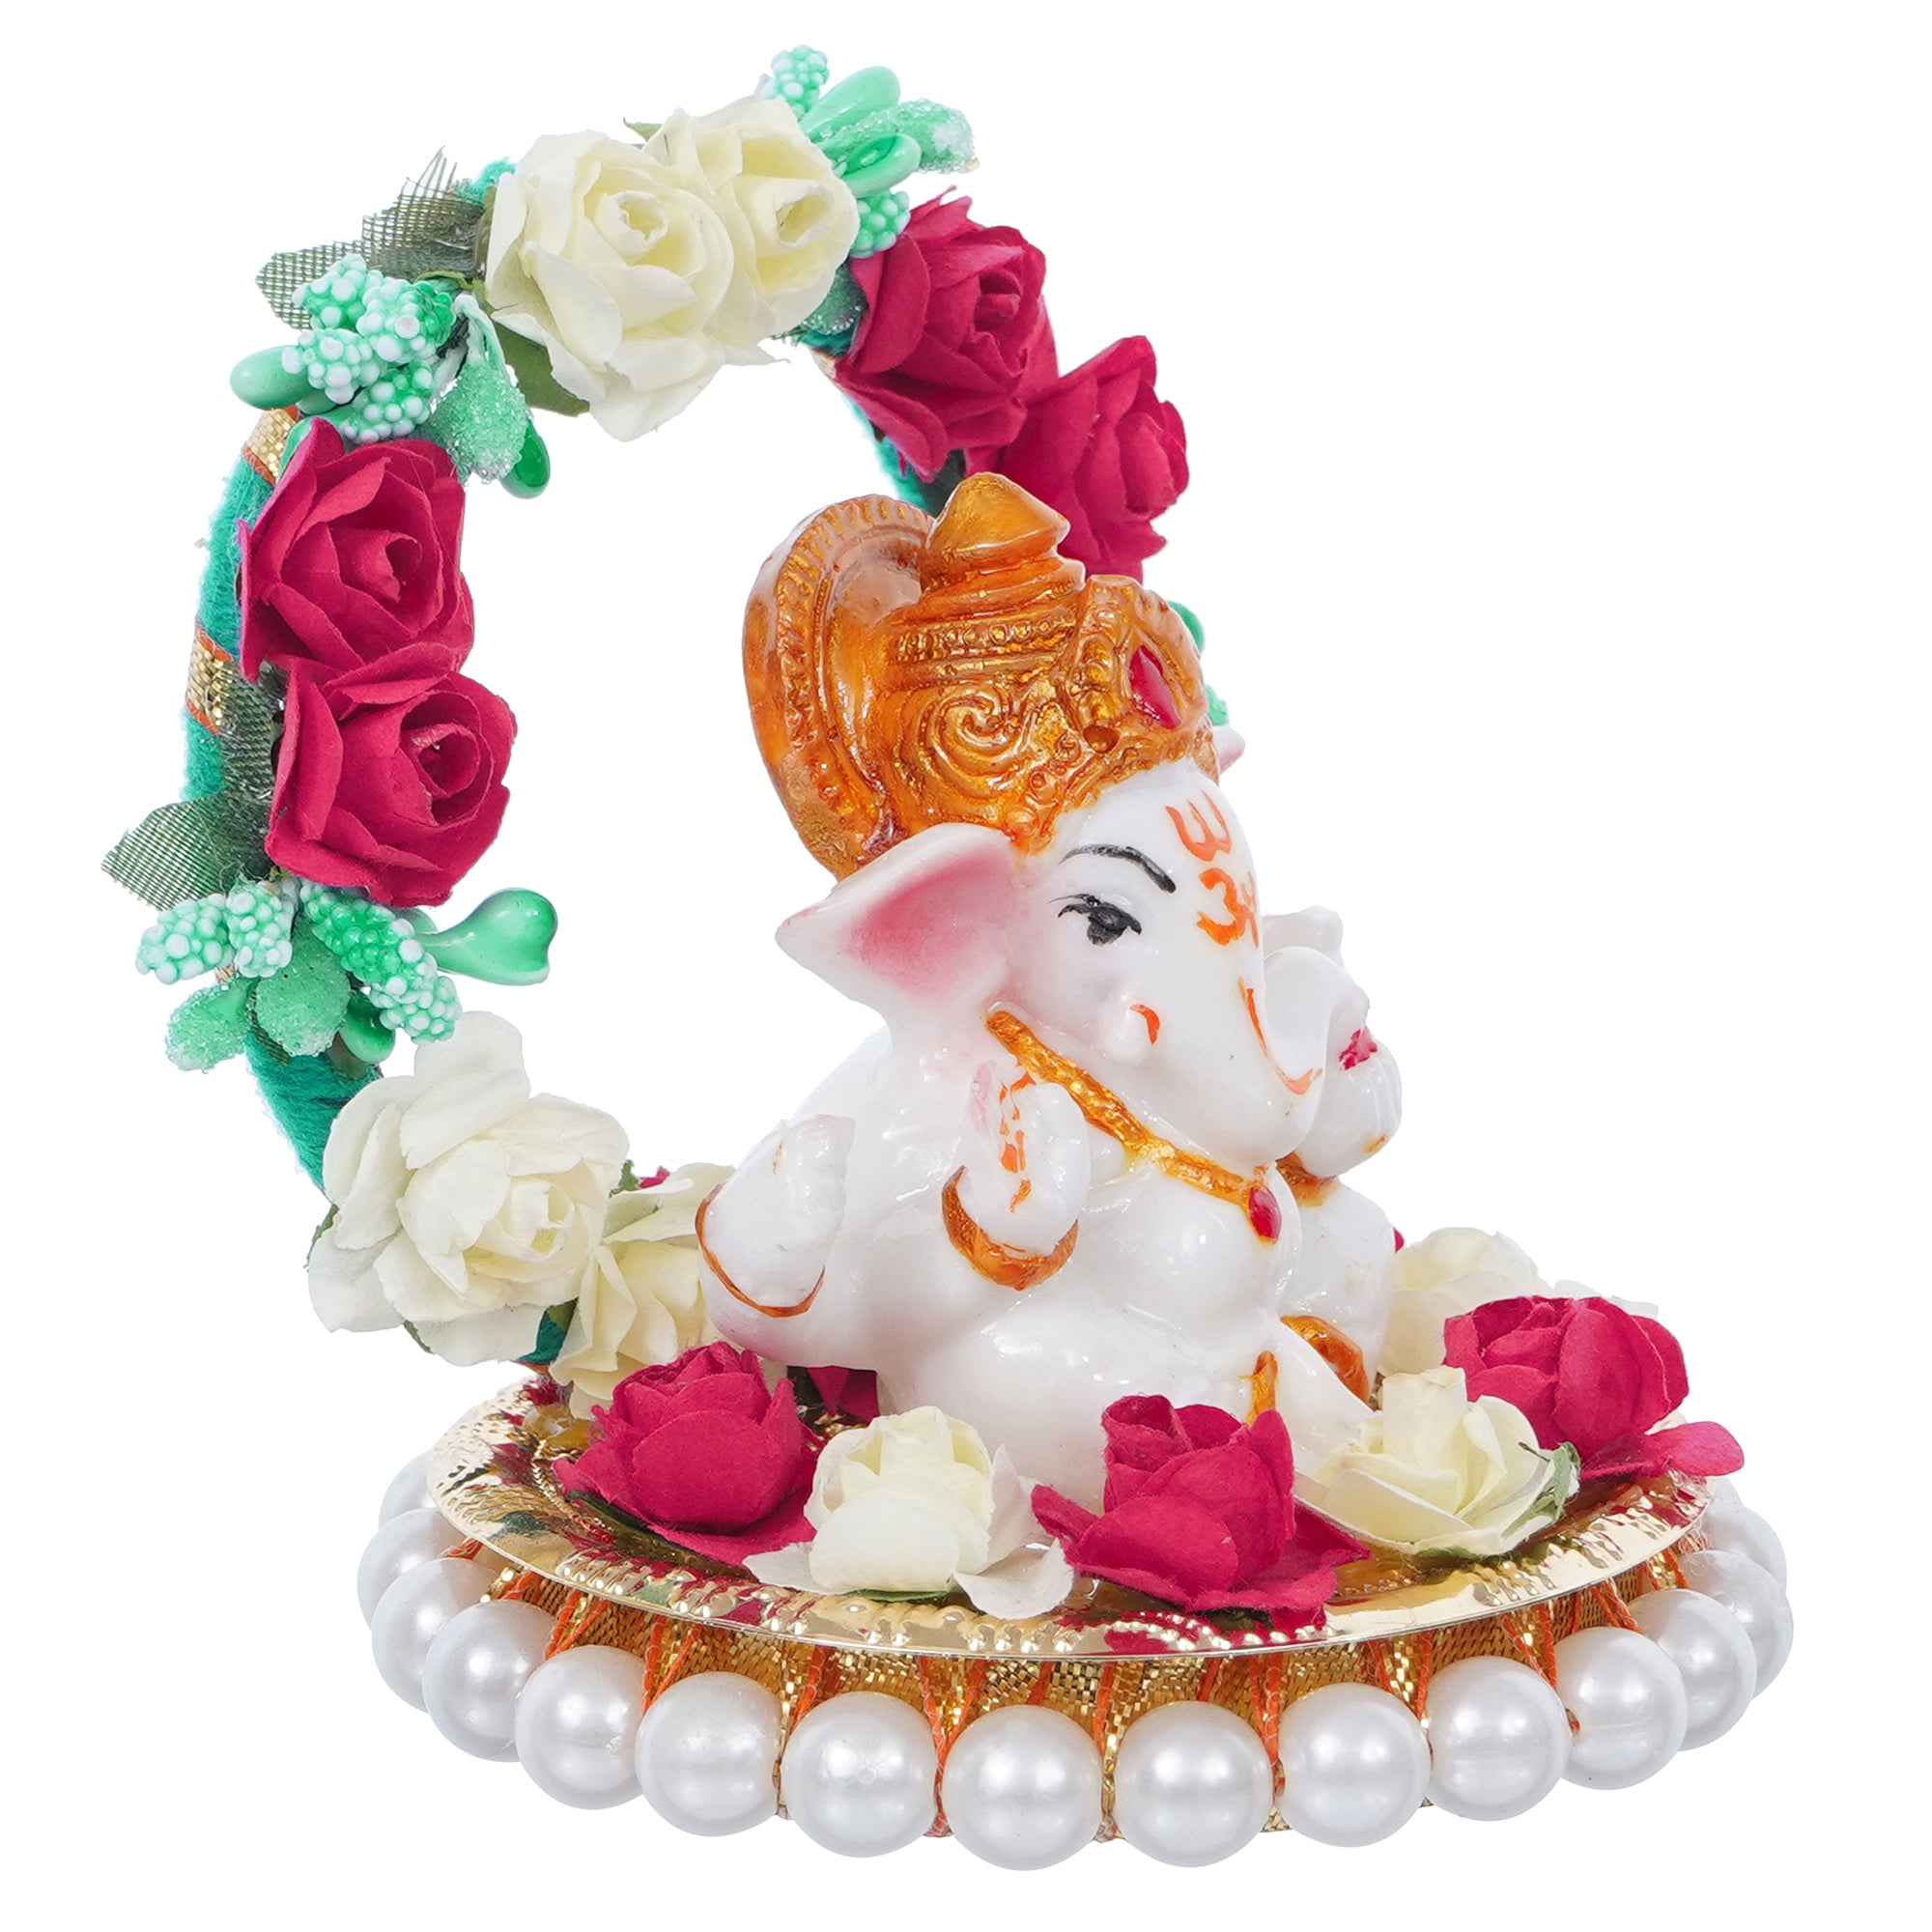 Polyresin Lord Ganesha Idol on Decorative Handcrafted Plate with Throne of Colorful Flowers 4